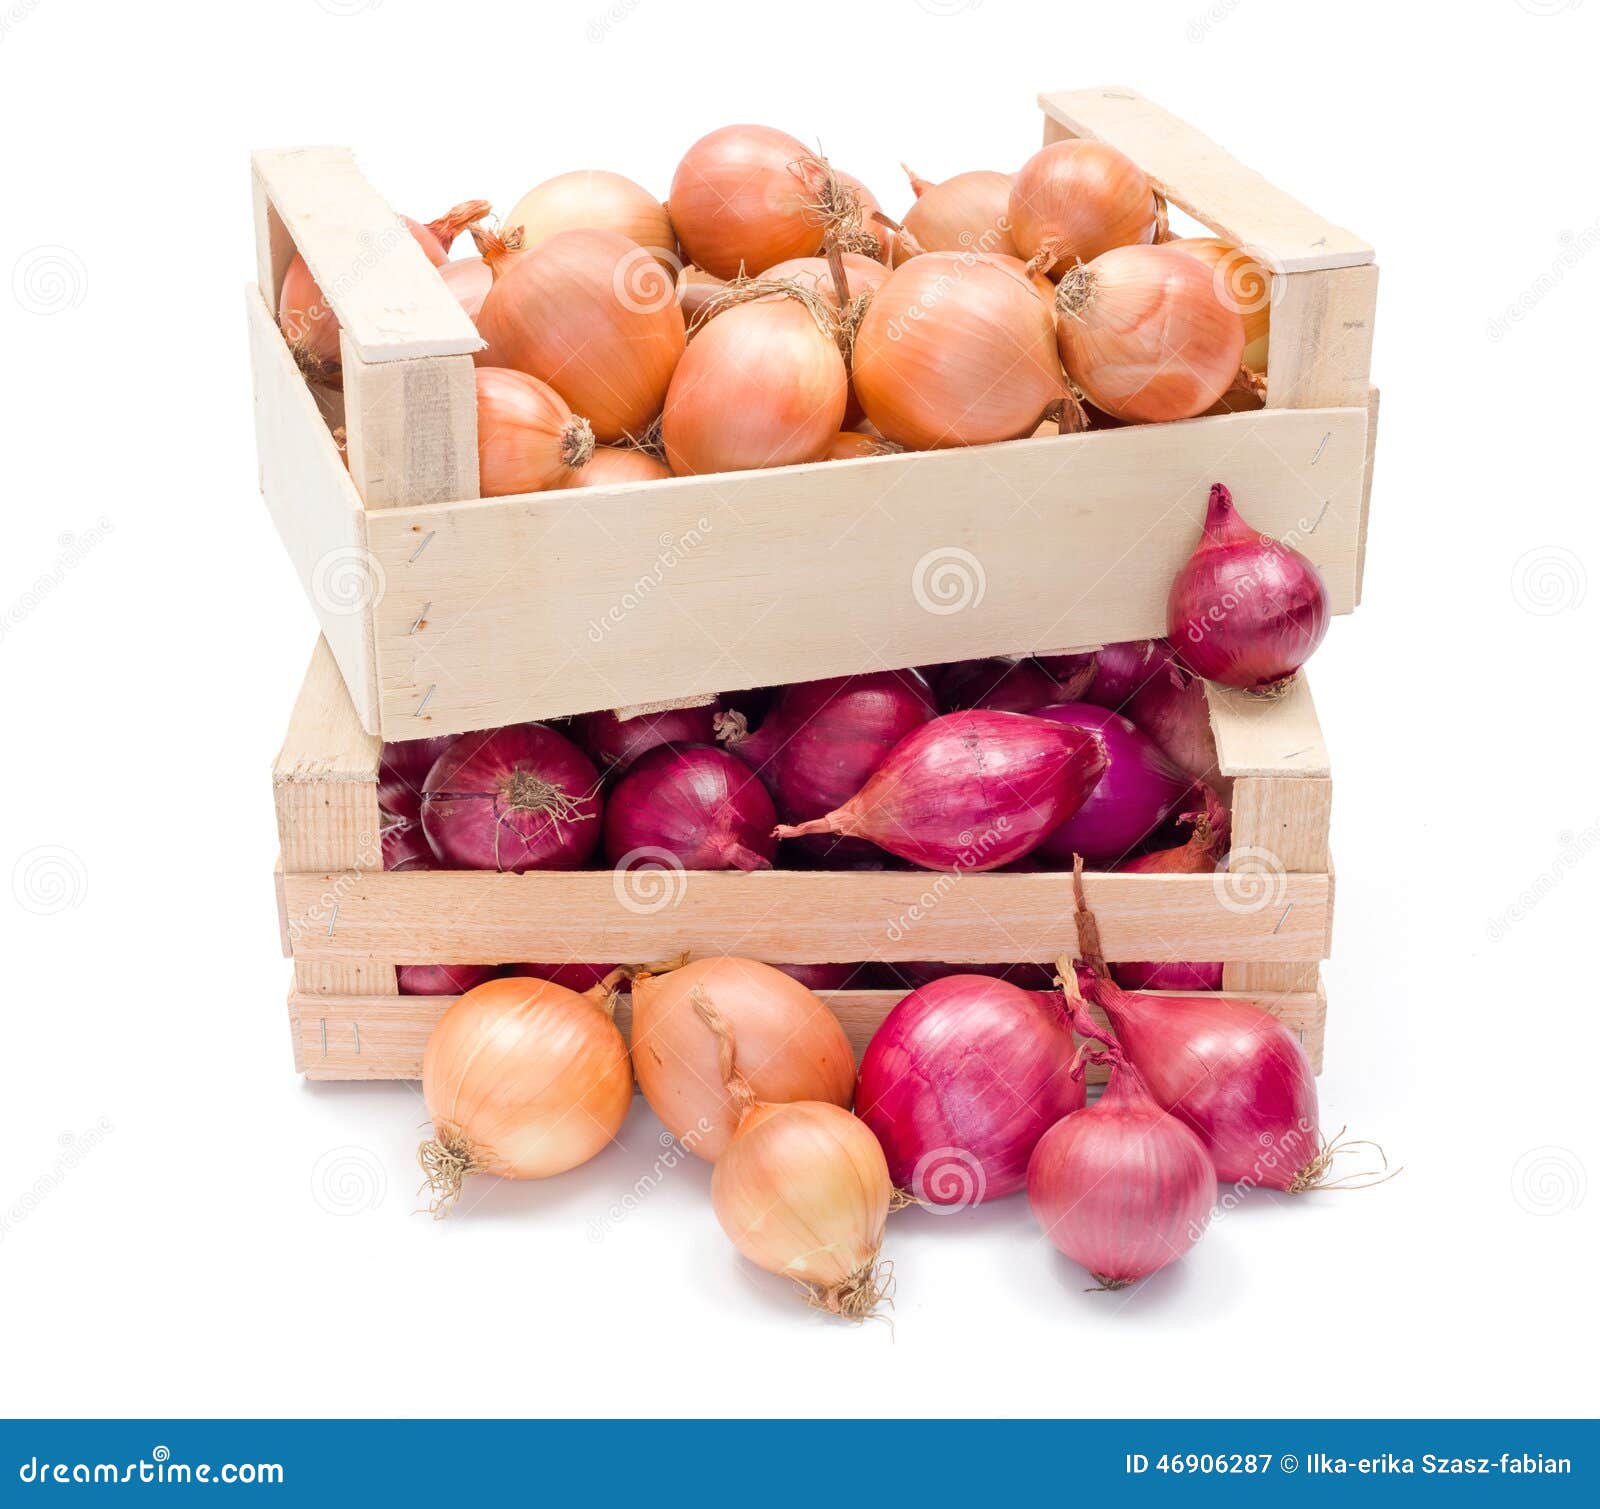 crates with onions